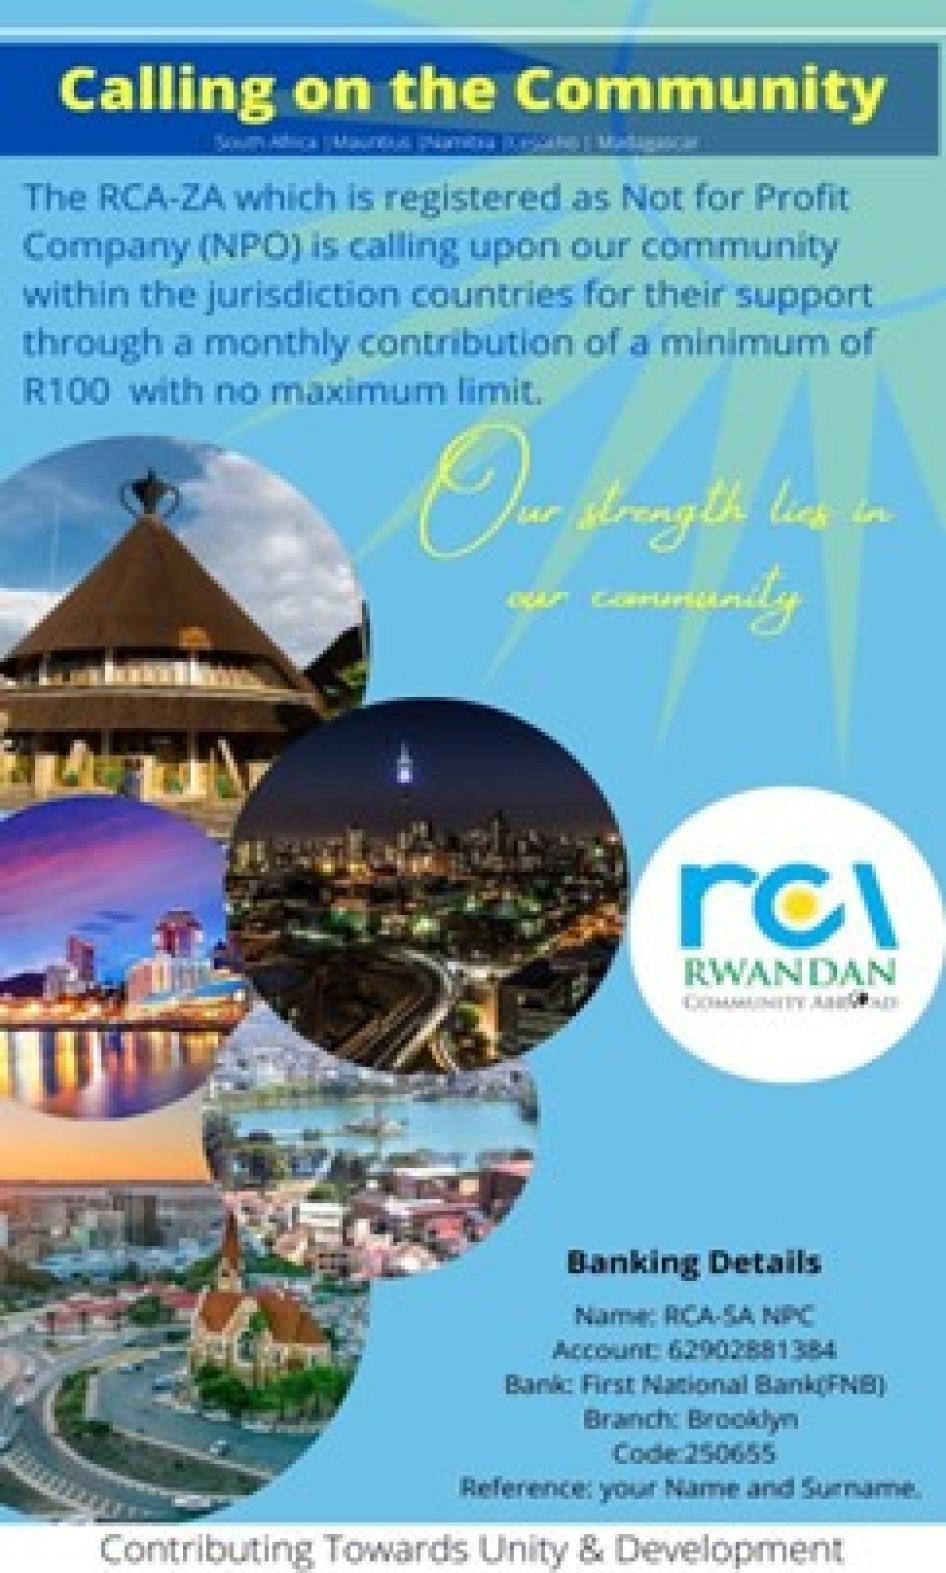 Flyer circulated on WhatsApp to the Rwandan community in Cape Town, South Africa, requesting financial contributions to the Rwandan Community Abroad.